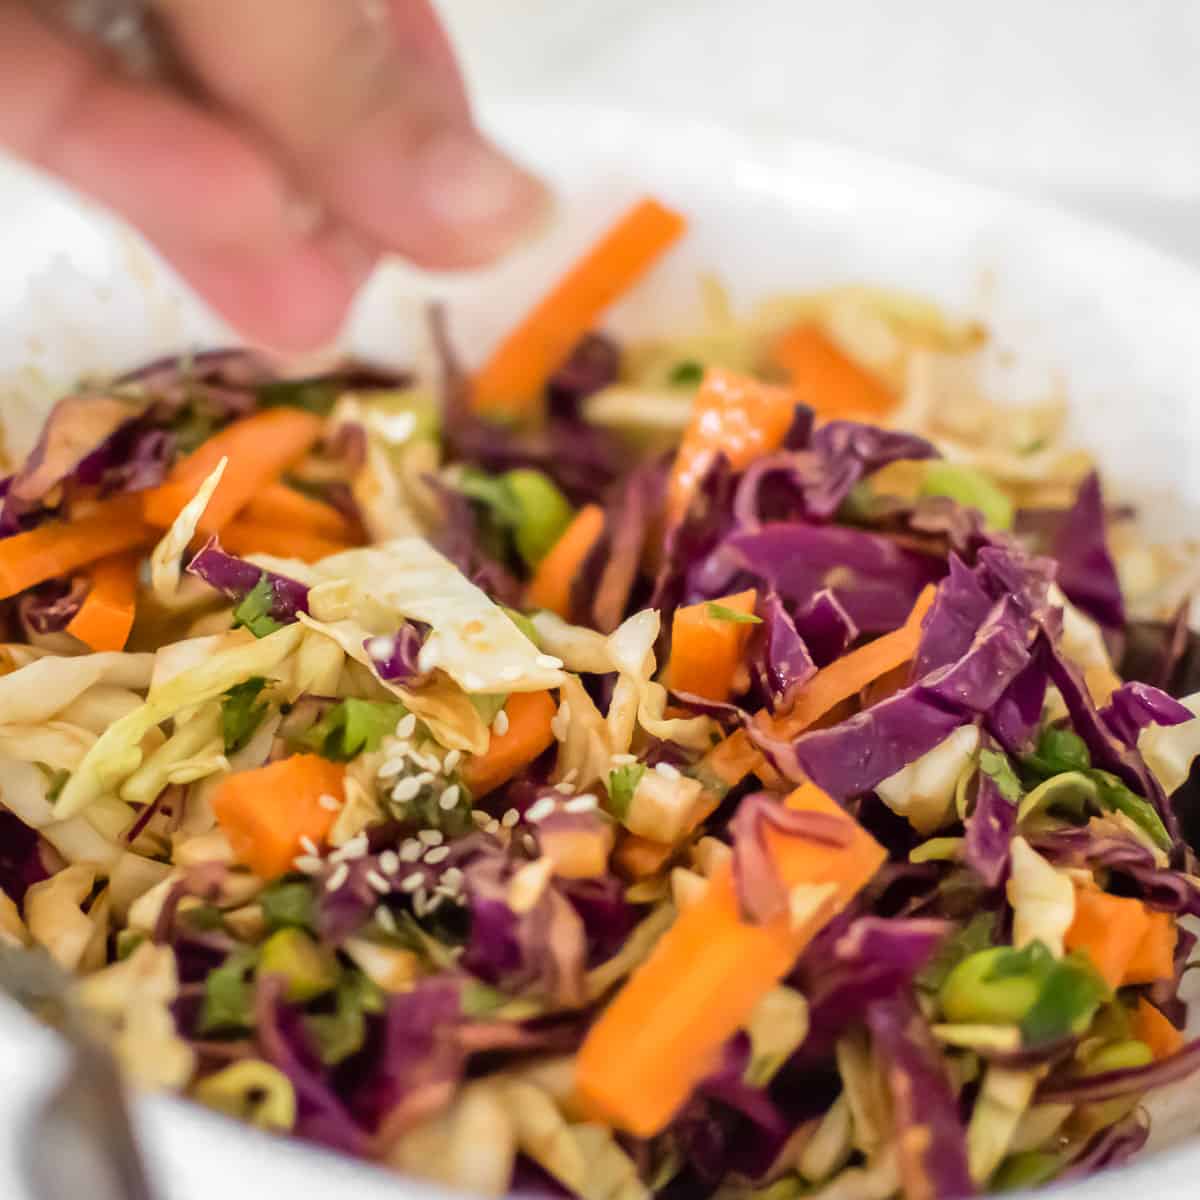 Asian cabbage salad being garnished to be served.